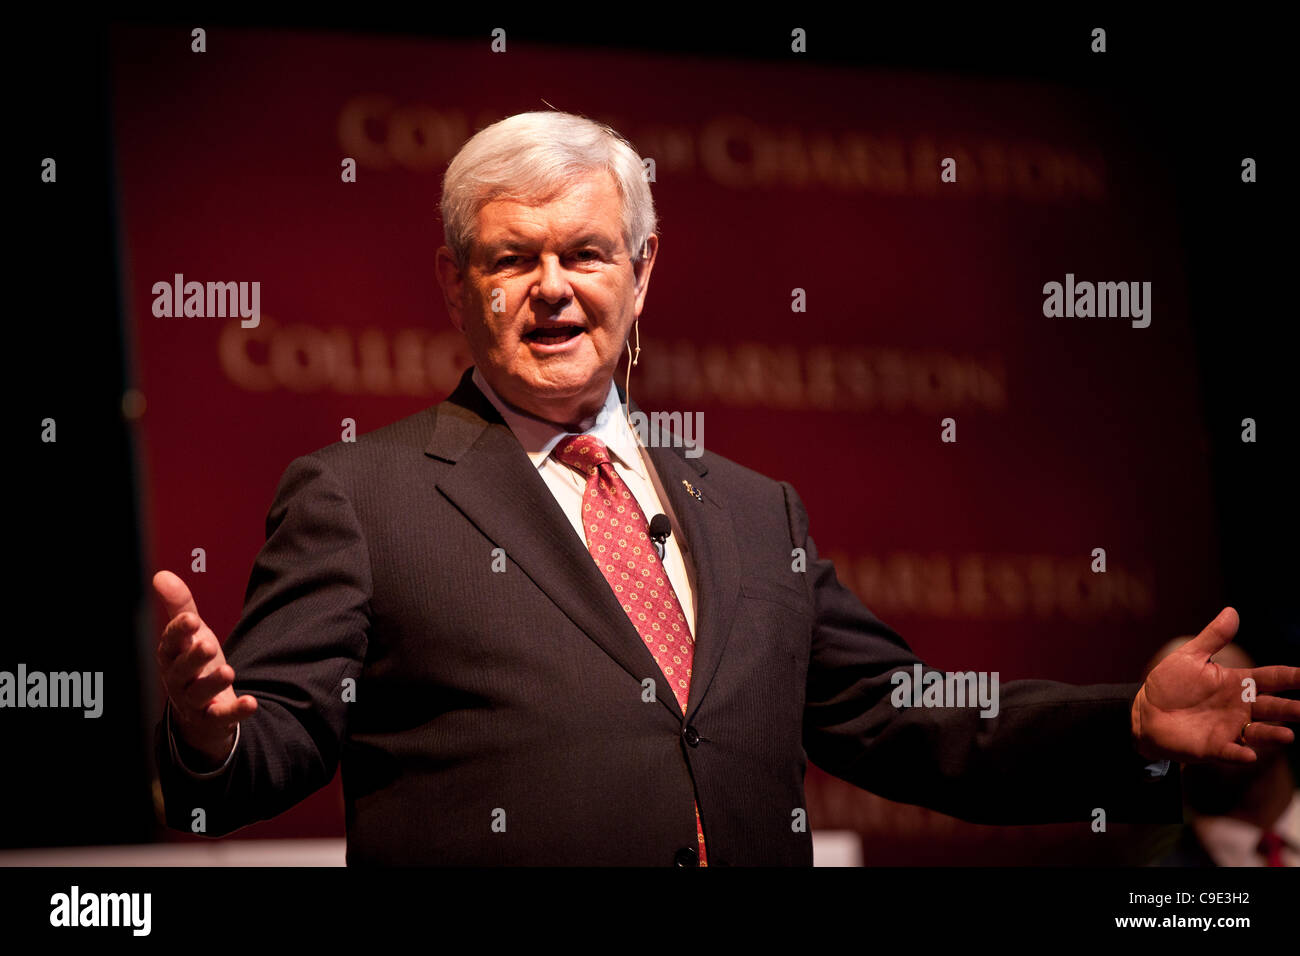 Republican presidential candidate Newt Gingrich at a townhall meeting at the College of Charleston on November 28, 2011 in Charleston, South Carolina.  The event is hosted by Republican Rep. Tim Scott. Stock Photo